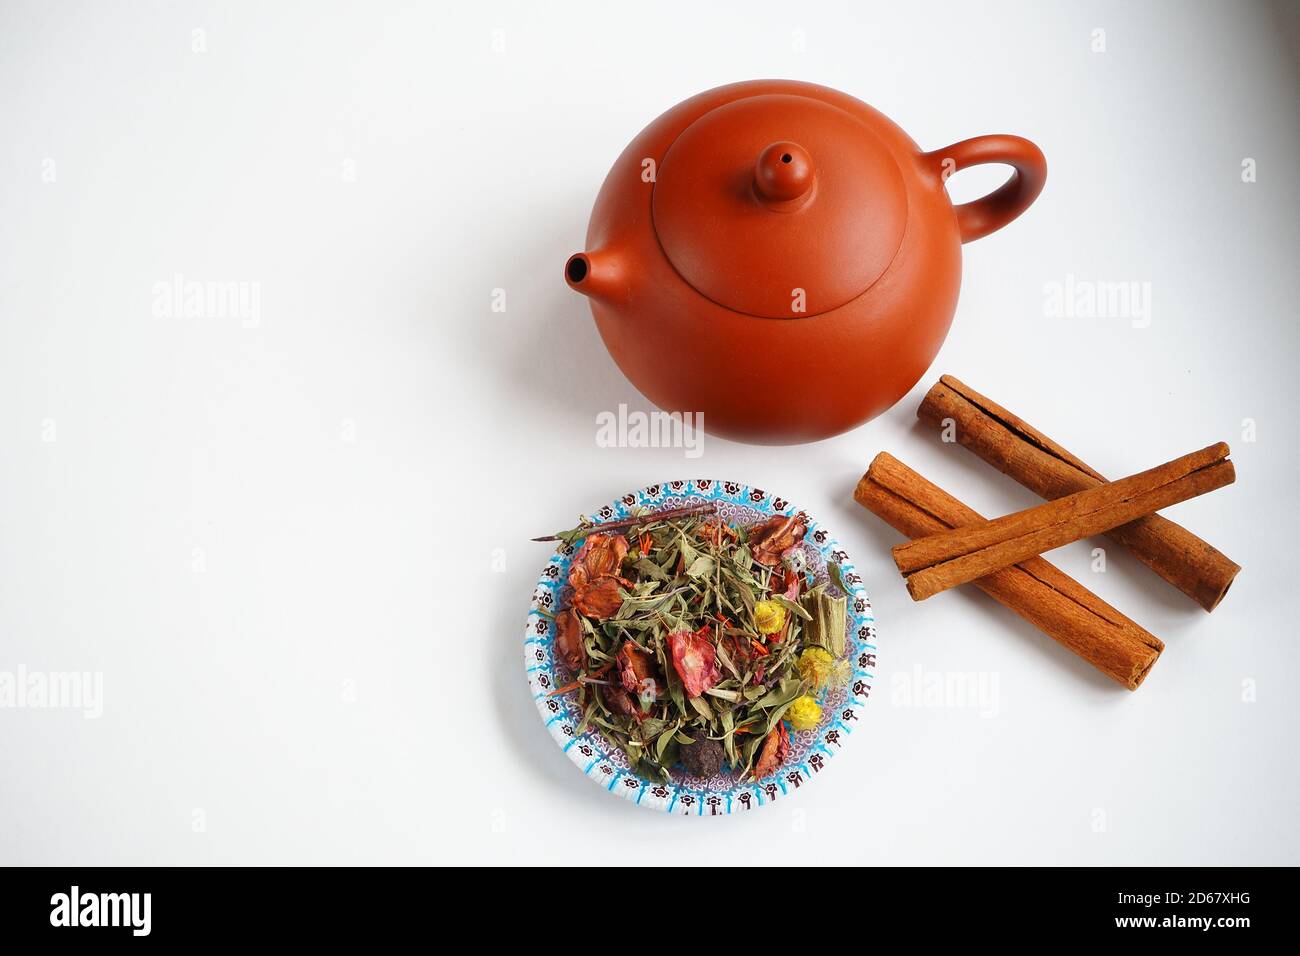 Chinese clay kettle for tea ceremony with herbs and cinnamon sticks. Stock Photo